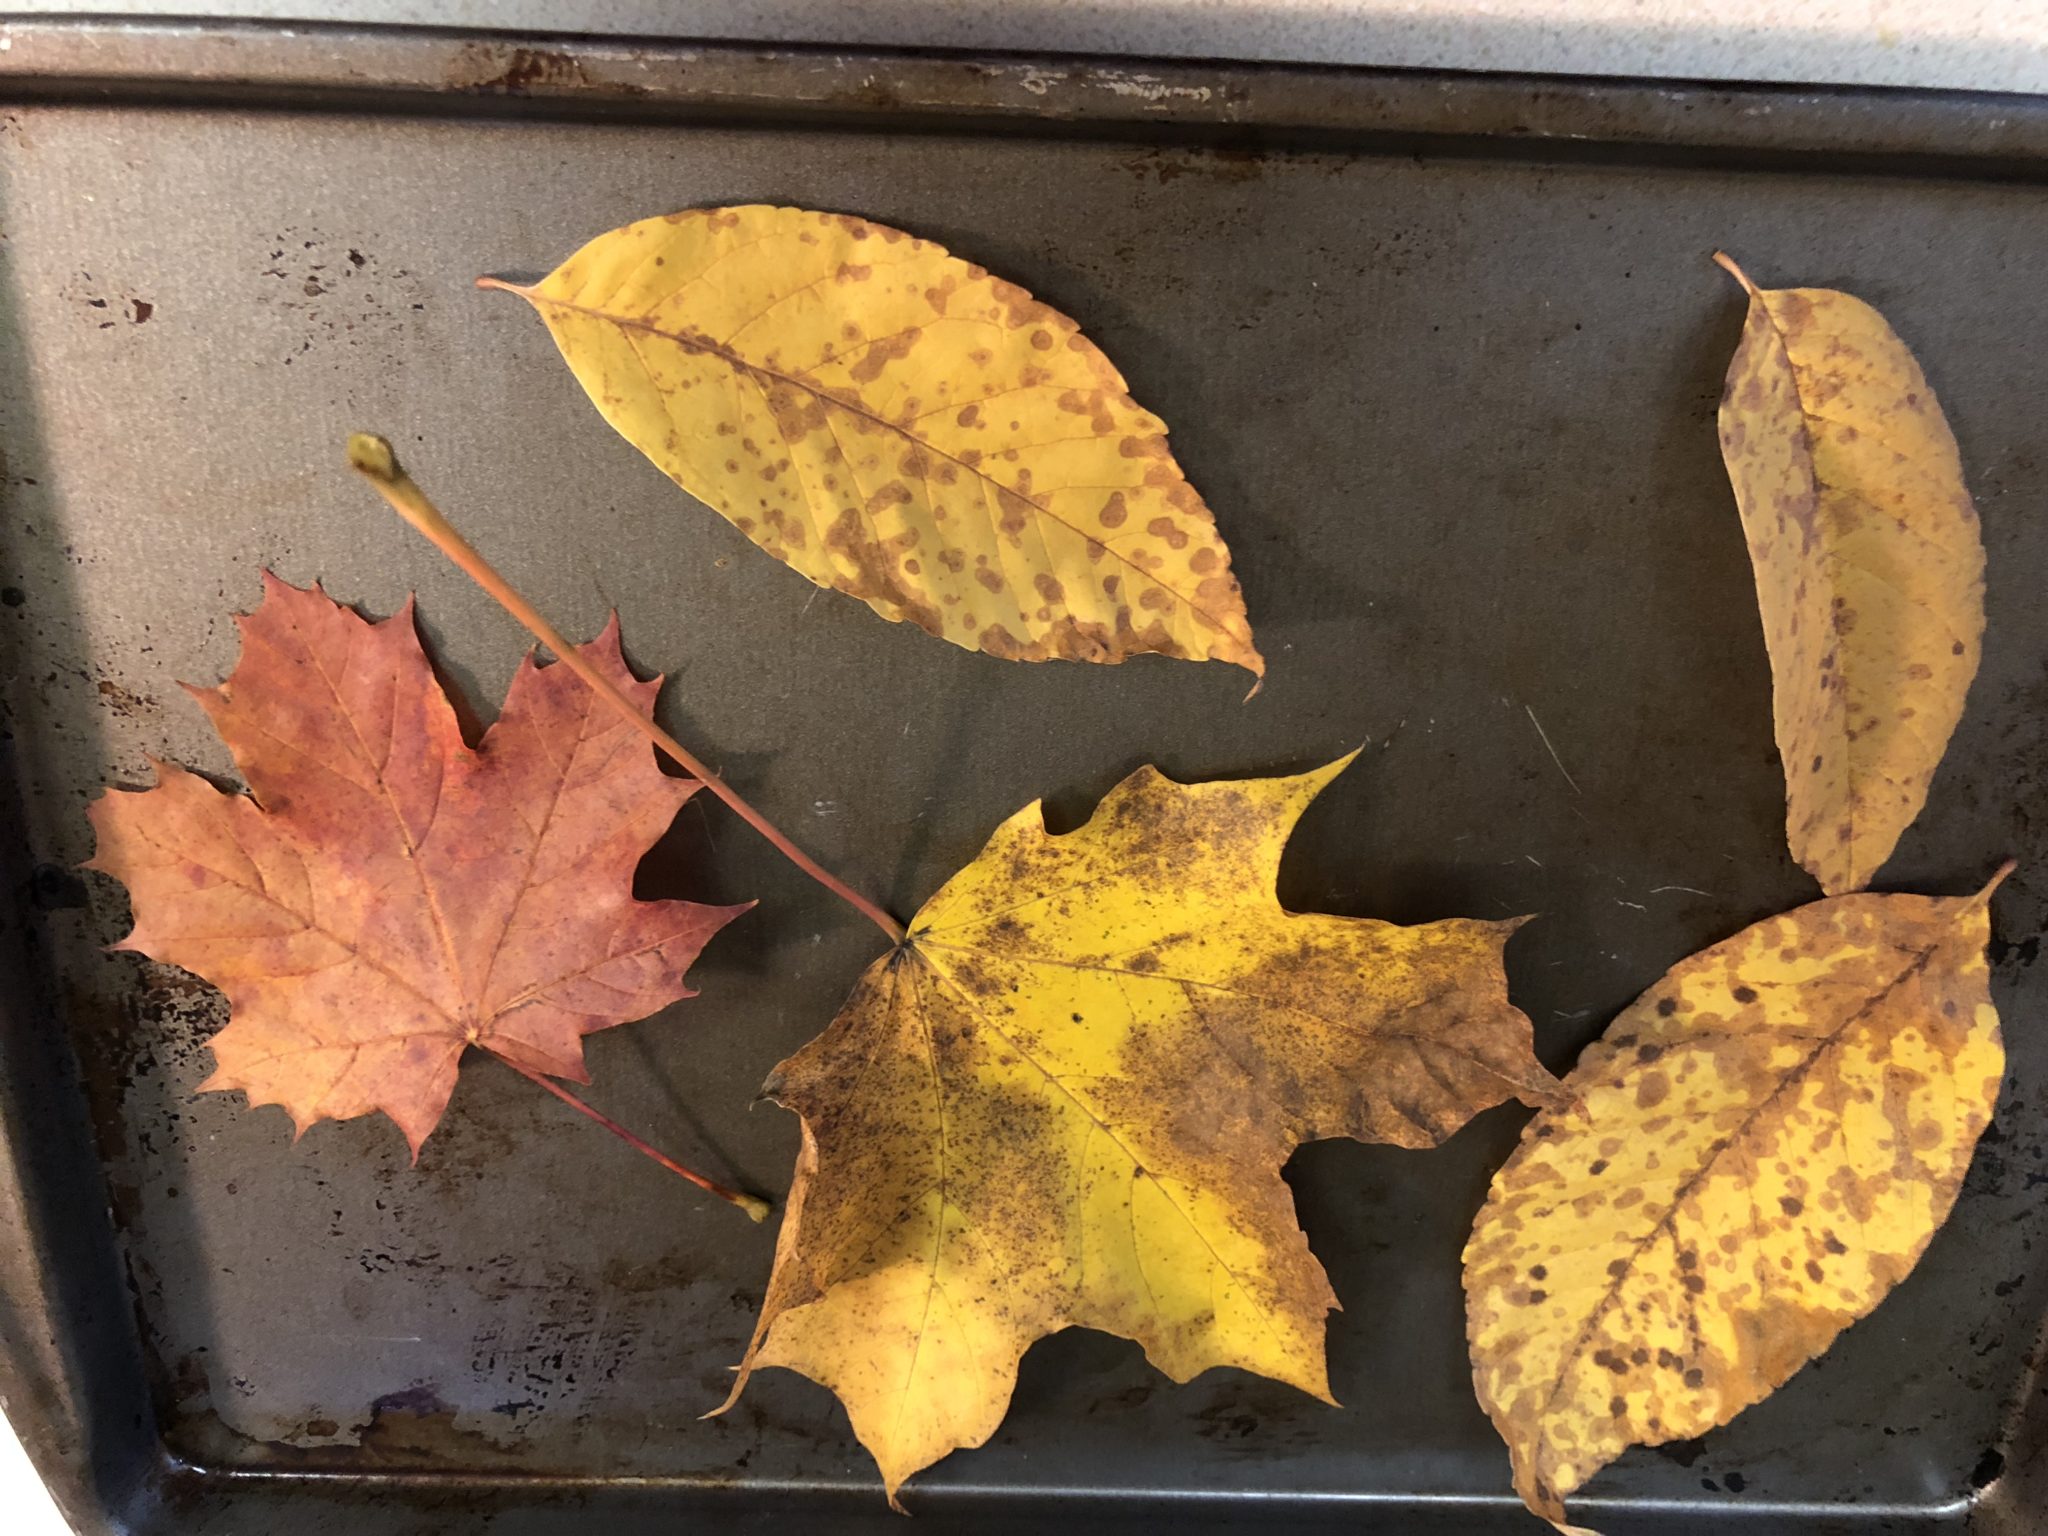 Leaves on a cookie sheet